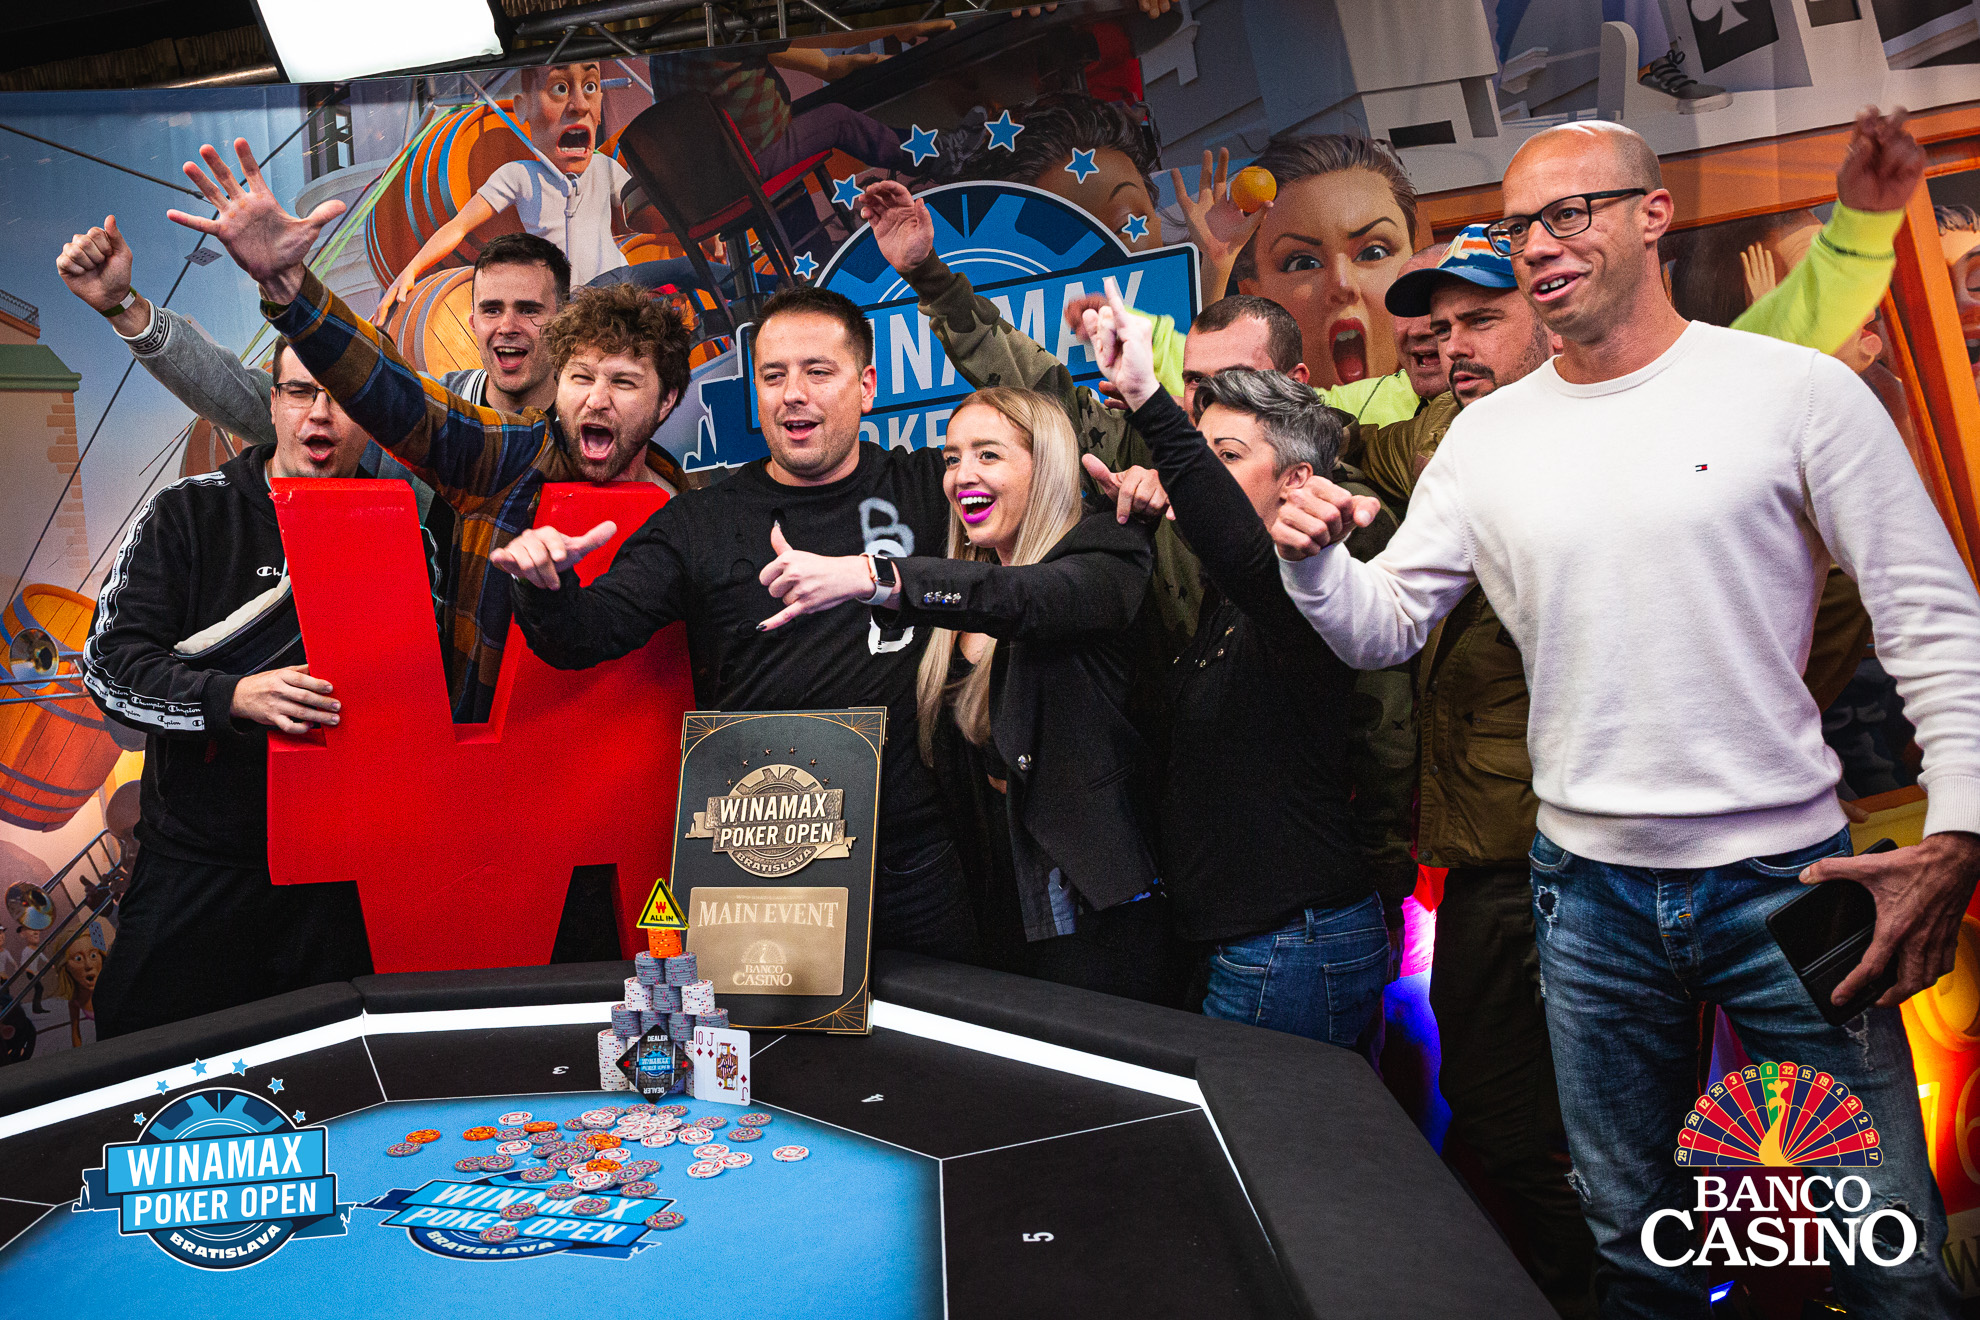 Home heads up ended with the victory of Martin Bartoš and he takes 100,000€ from Banco Casino!